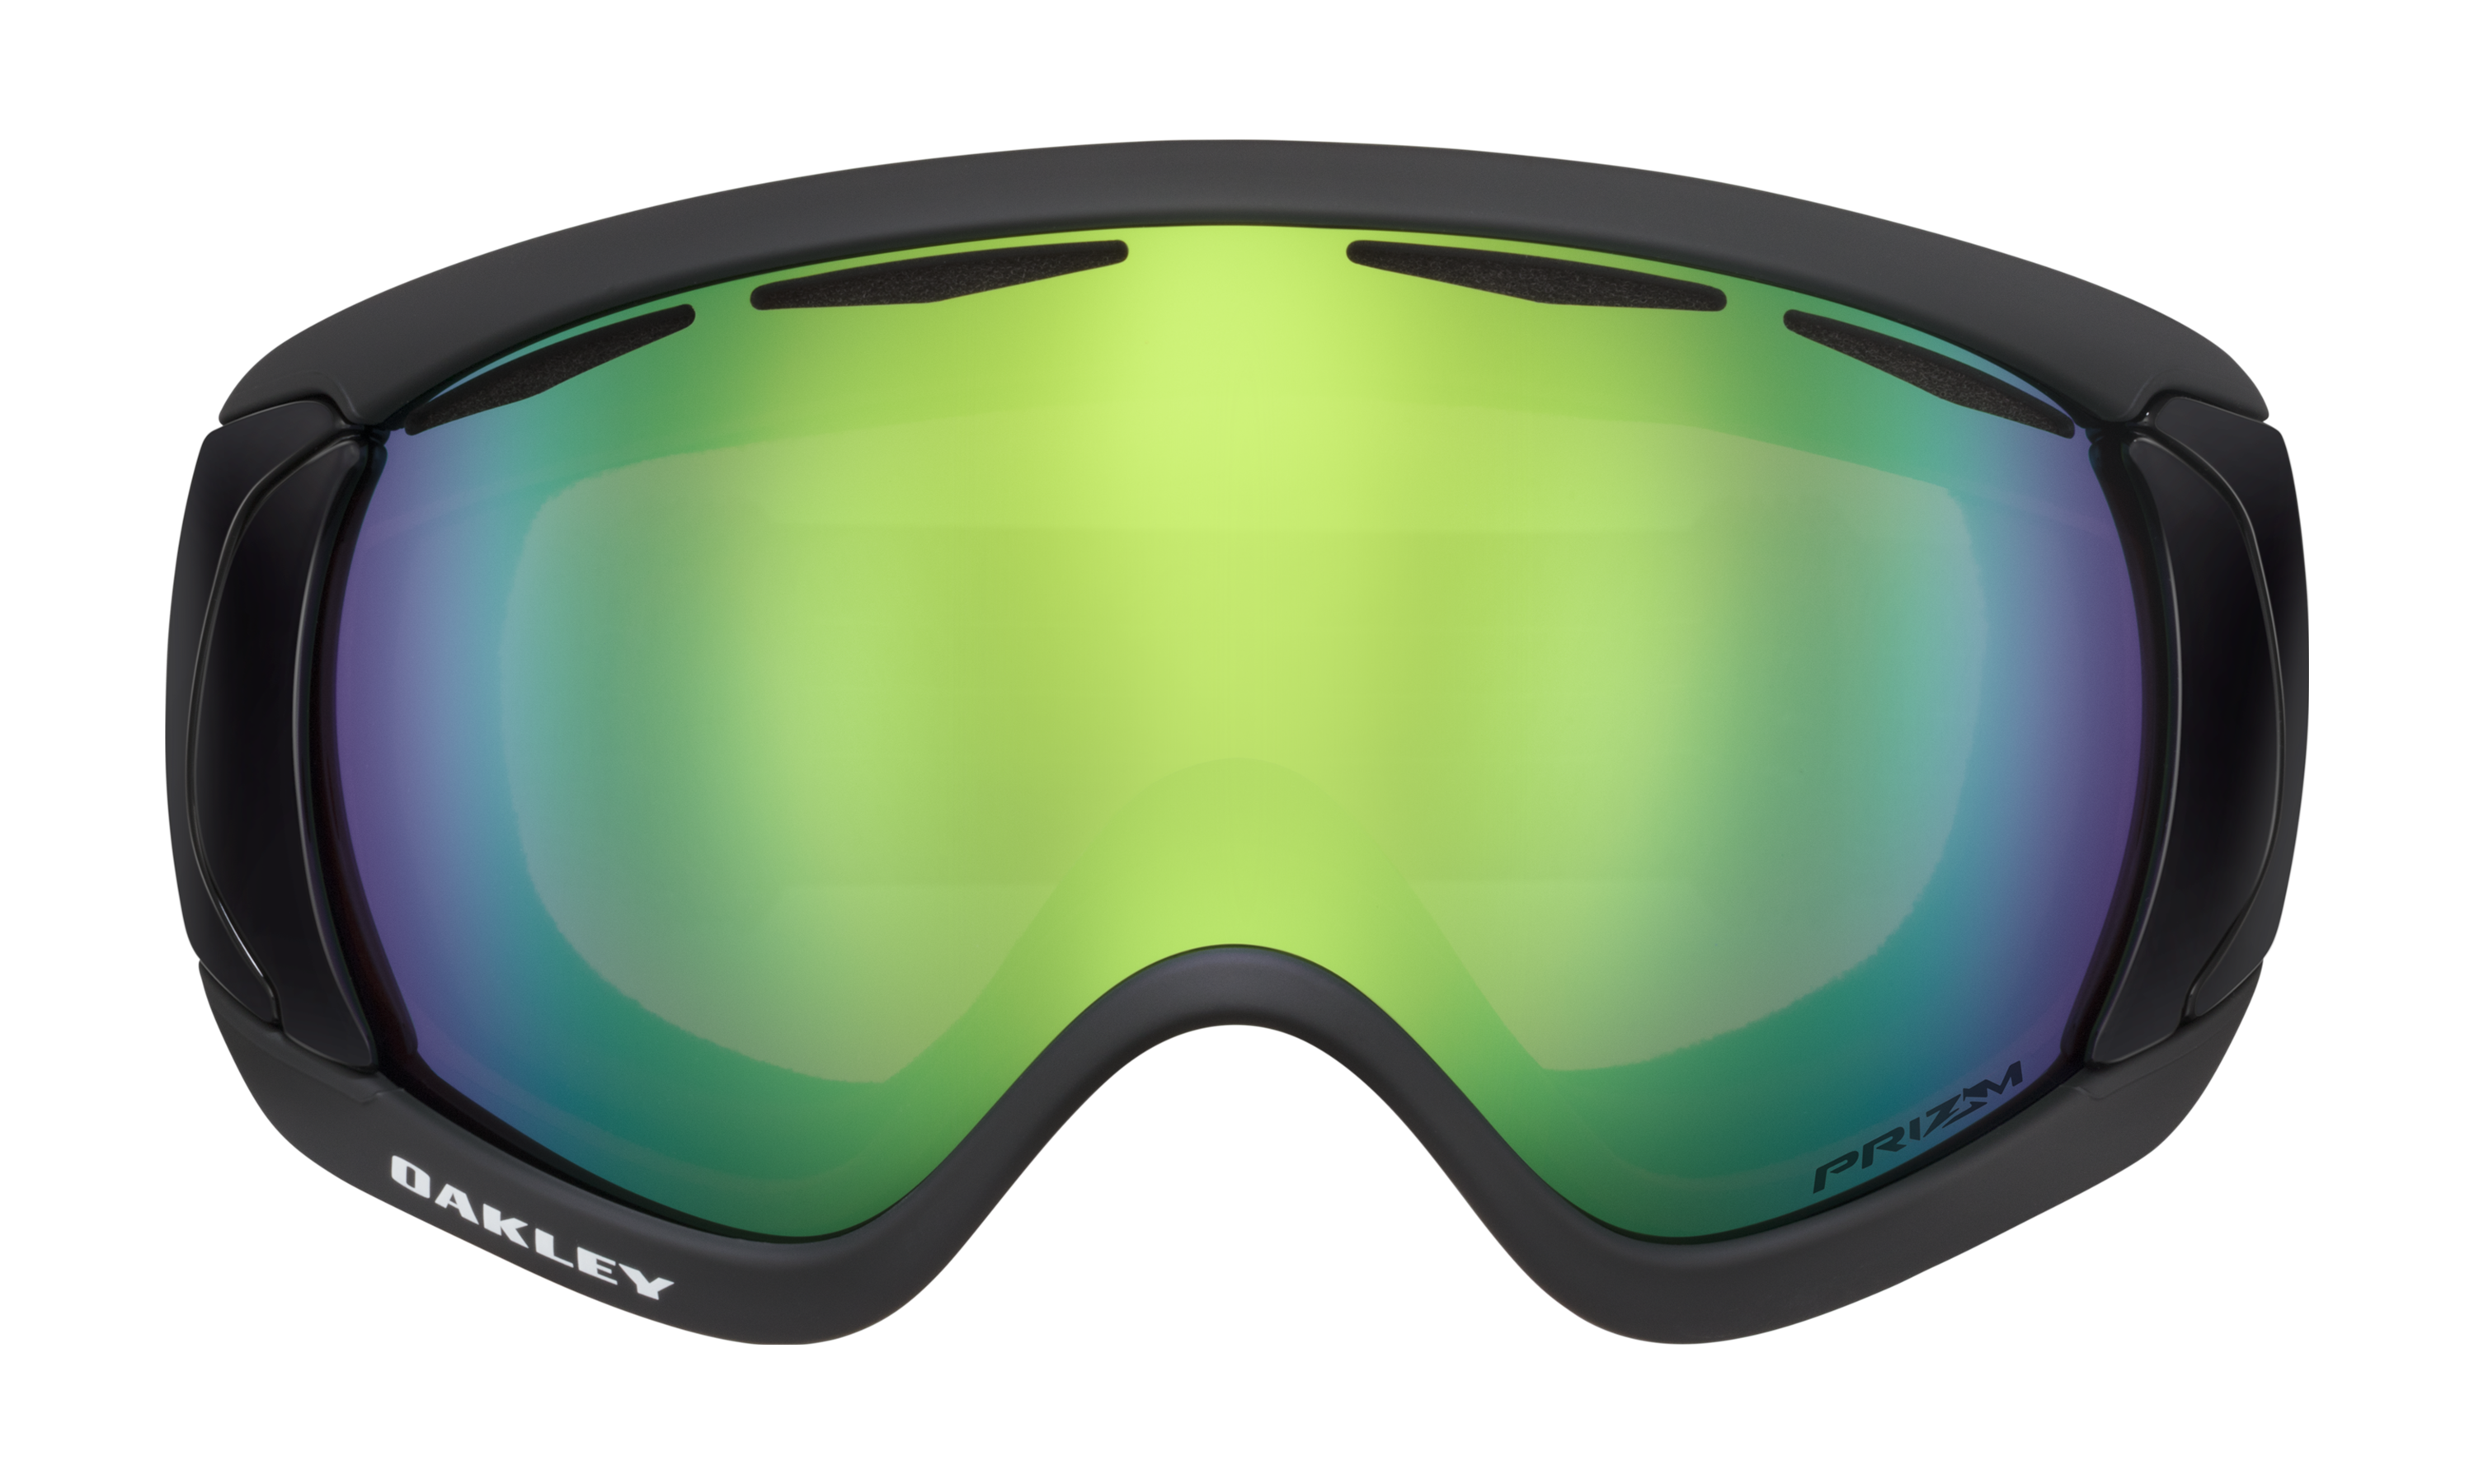 oakley canopy goggles